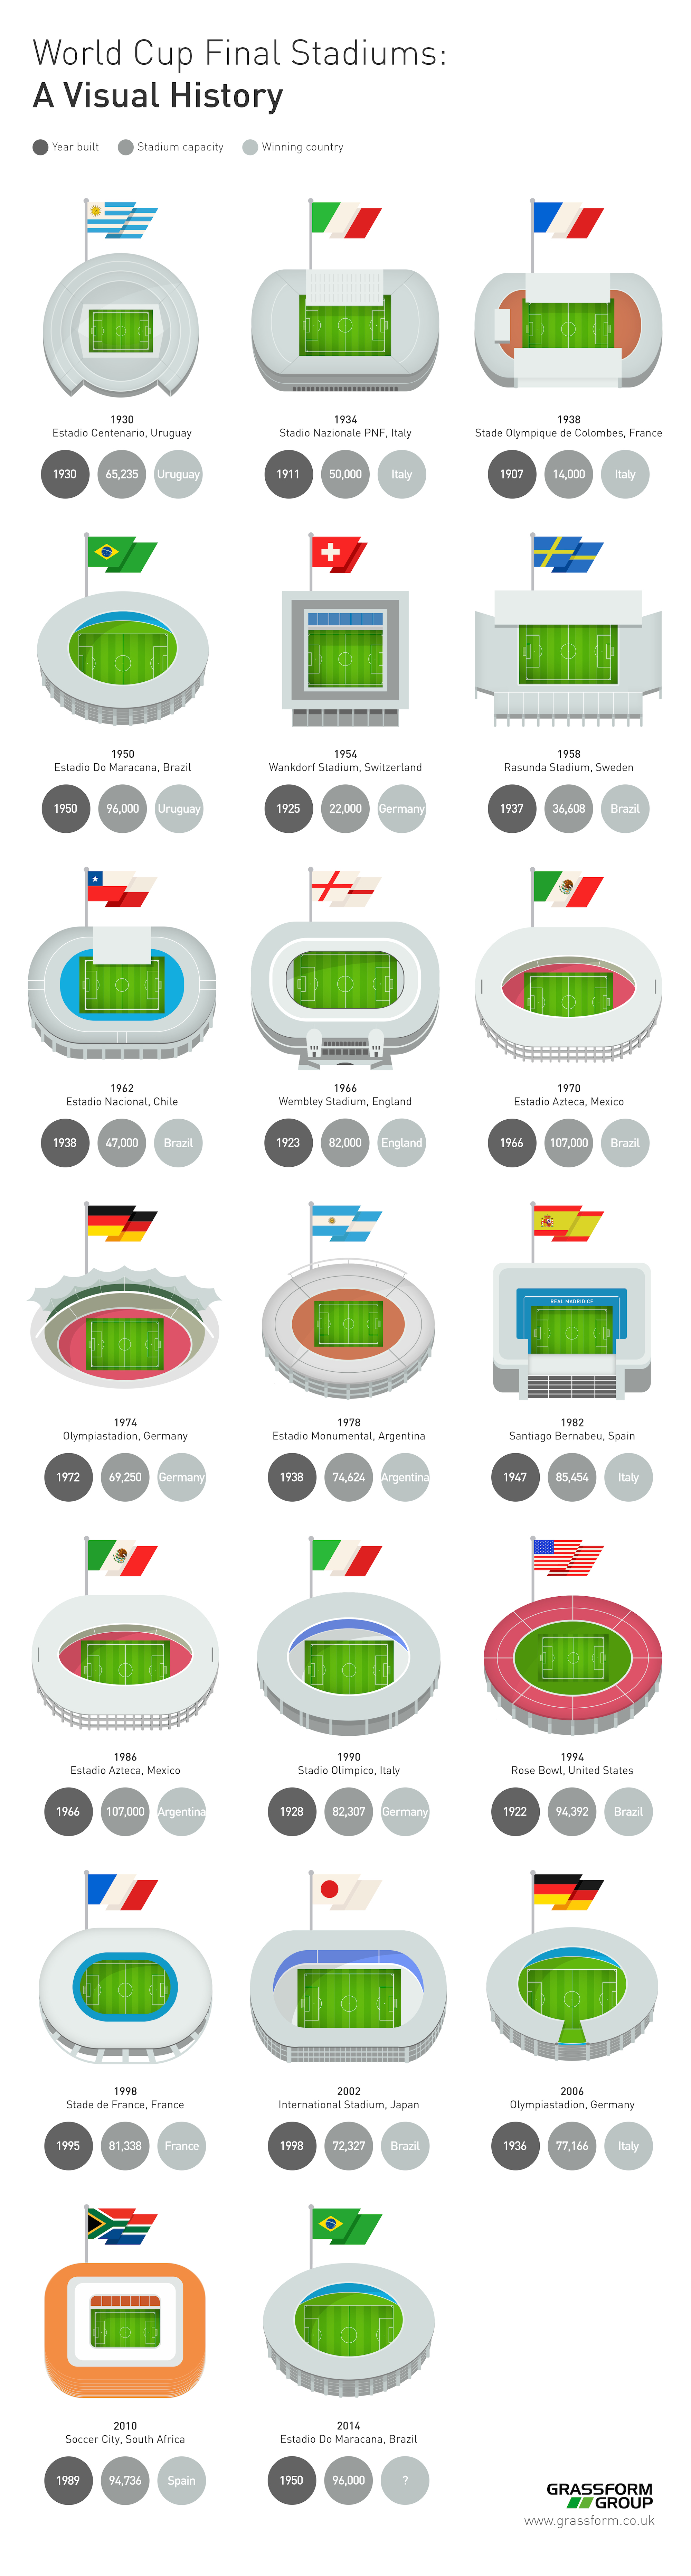 World-Cup-Final-Stadiums-Visual-History